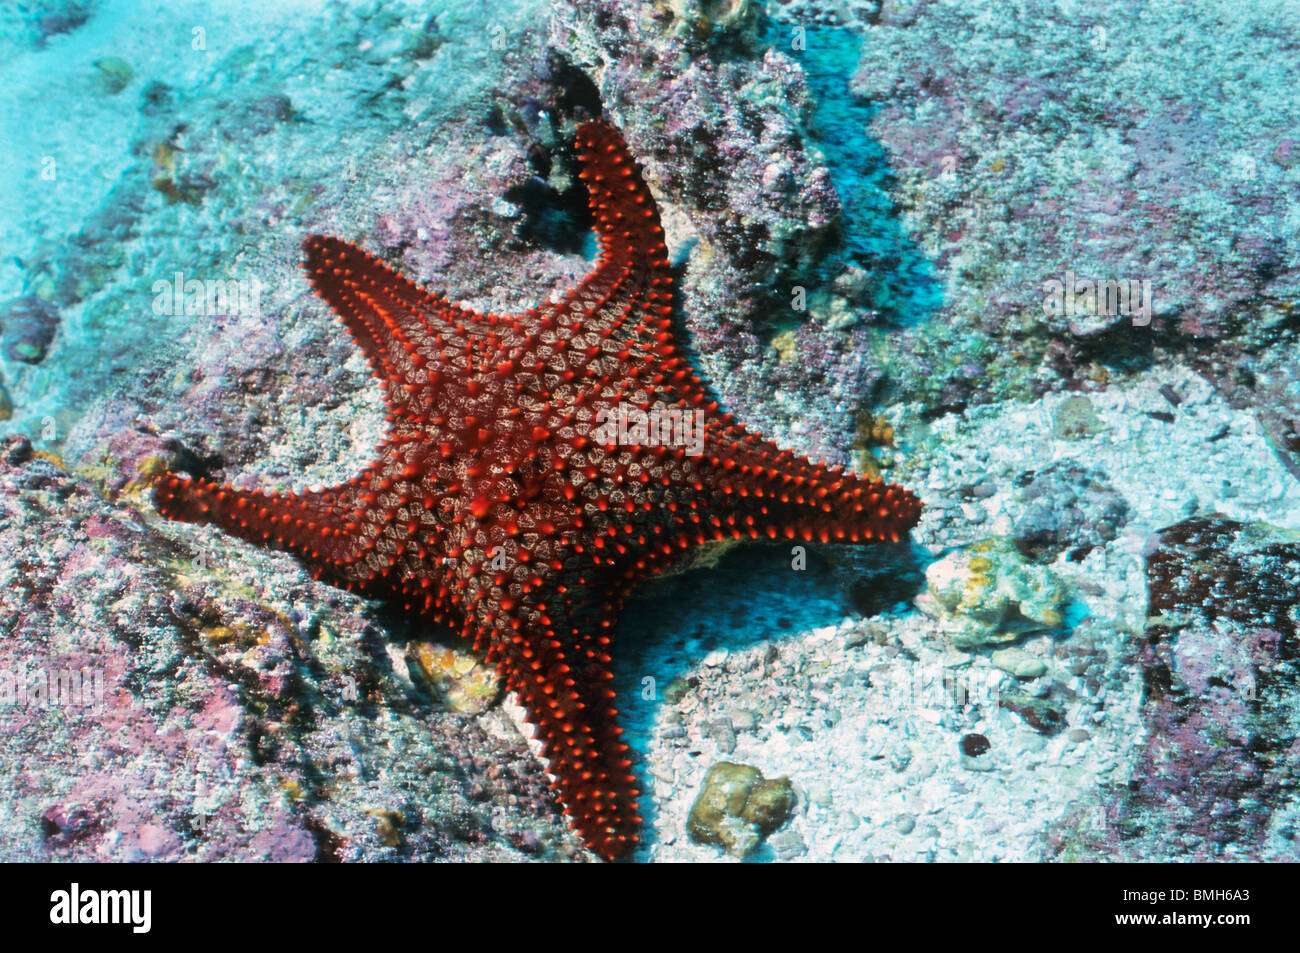 Cushion Star. Sea Star. Star Fish. Panamic Cushion Star underwater in the Galapagos Islands. Scuba diving and underwater life. Stock Photo